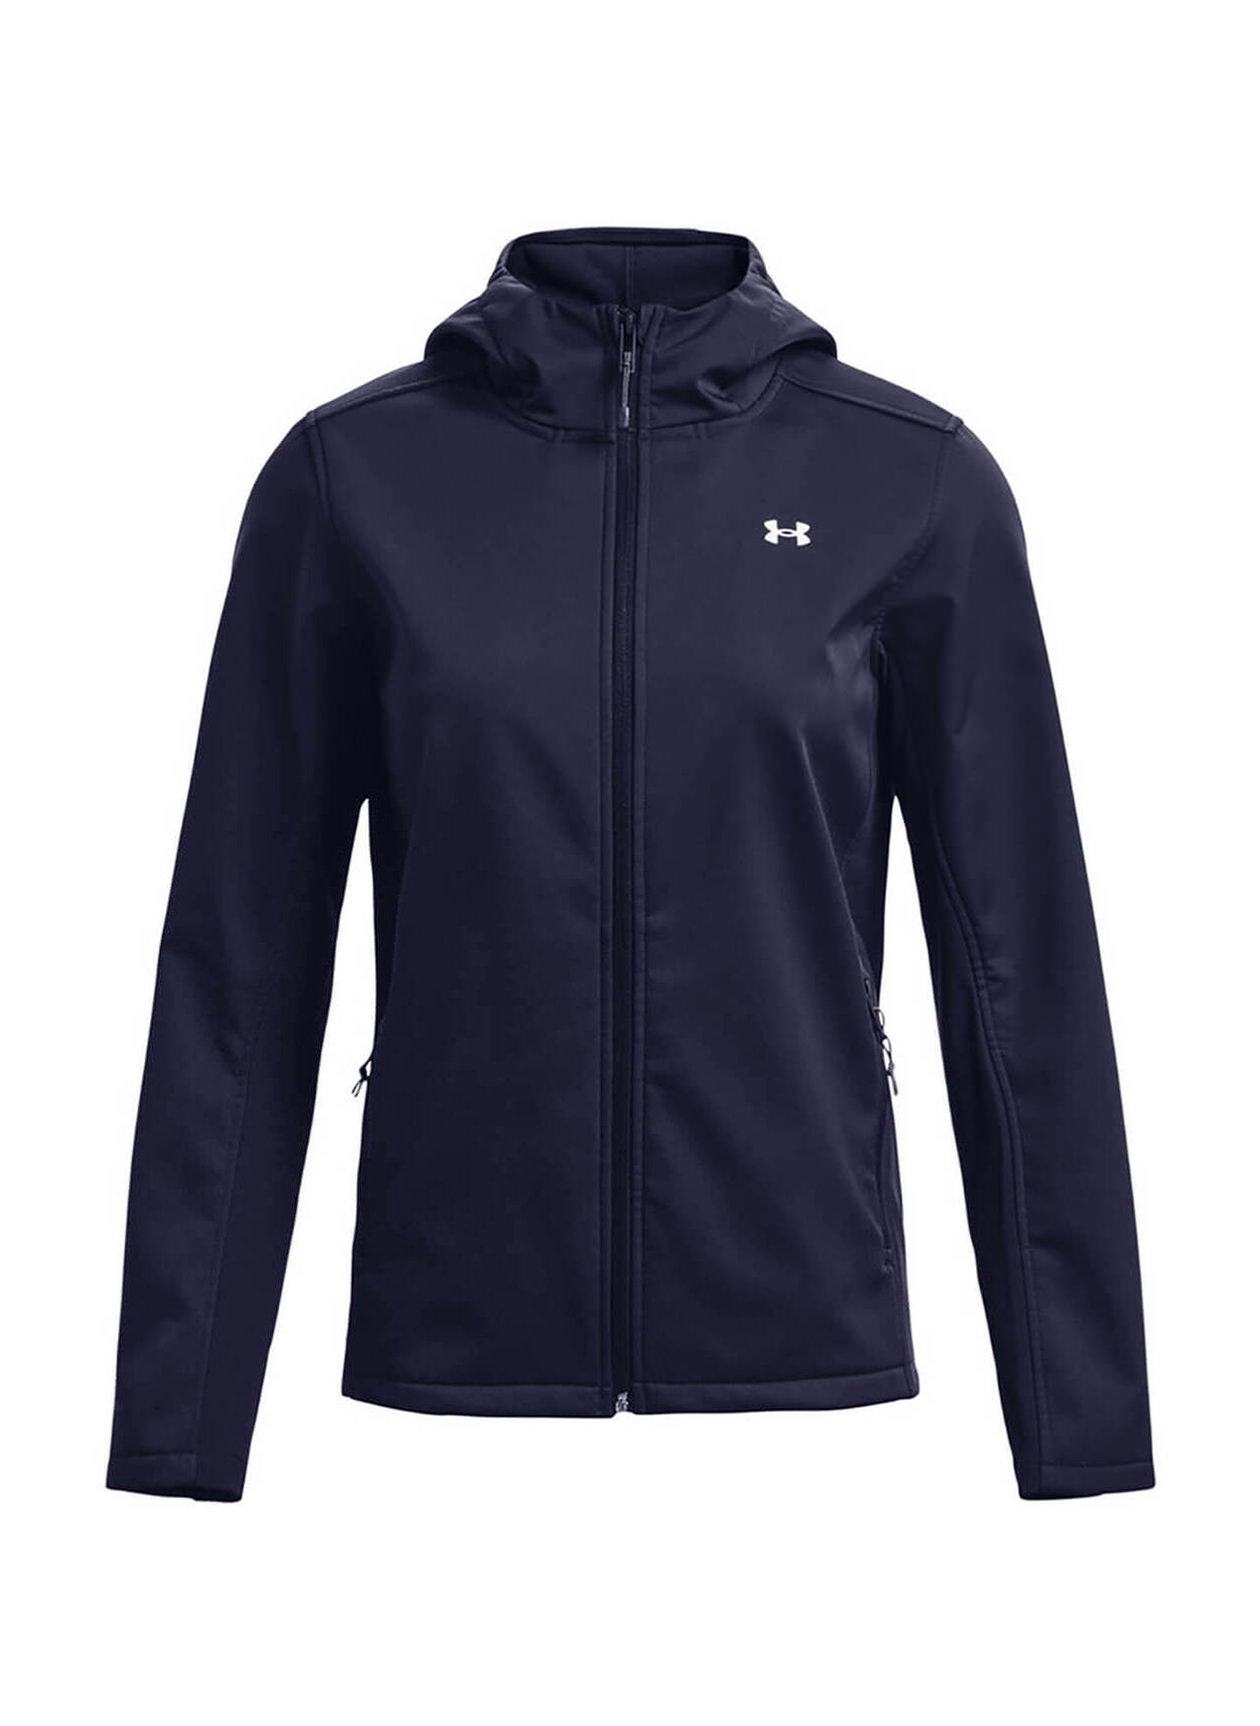 Branded Under Armour Women's Navy / White ColdGear Infrared Shield 2.0  Hooded Jacket